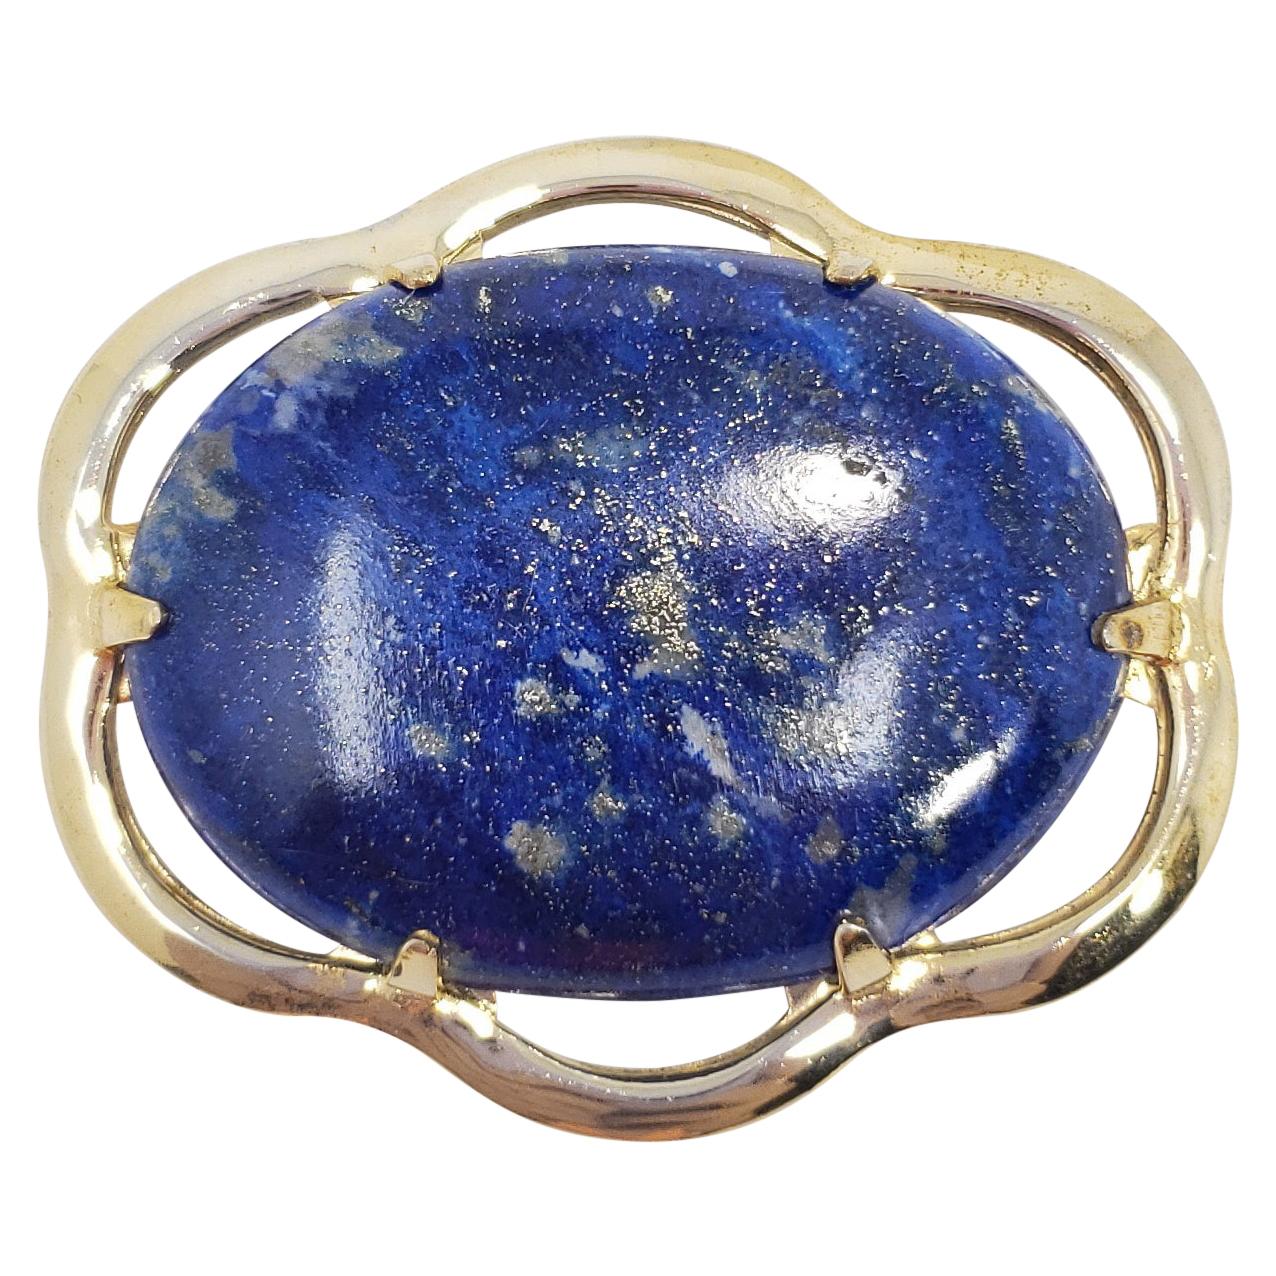 Vintage Lapis Lazuli Cabochon Pin Brooch in Gold-Filled Setting, Mid Late 1900s For Sale